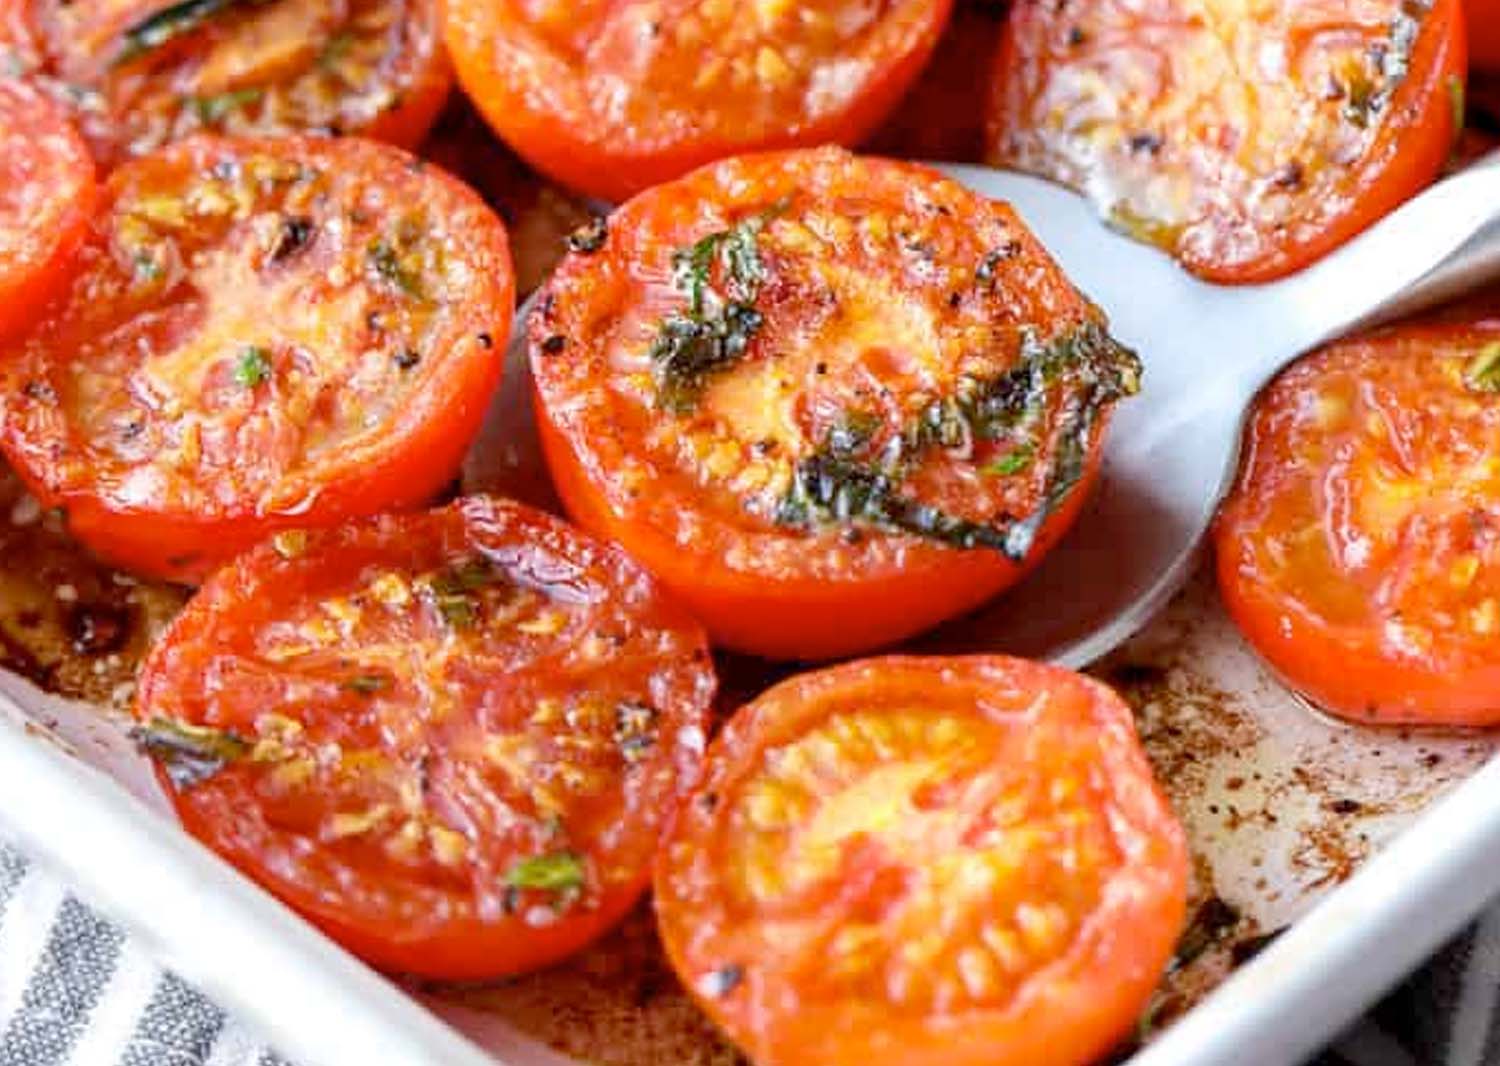 Top Different Ways to Prepare Tomatoes